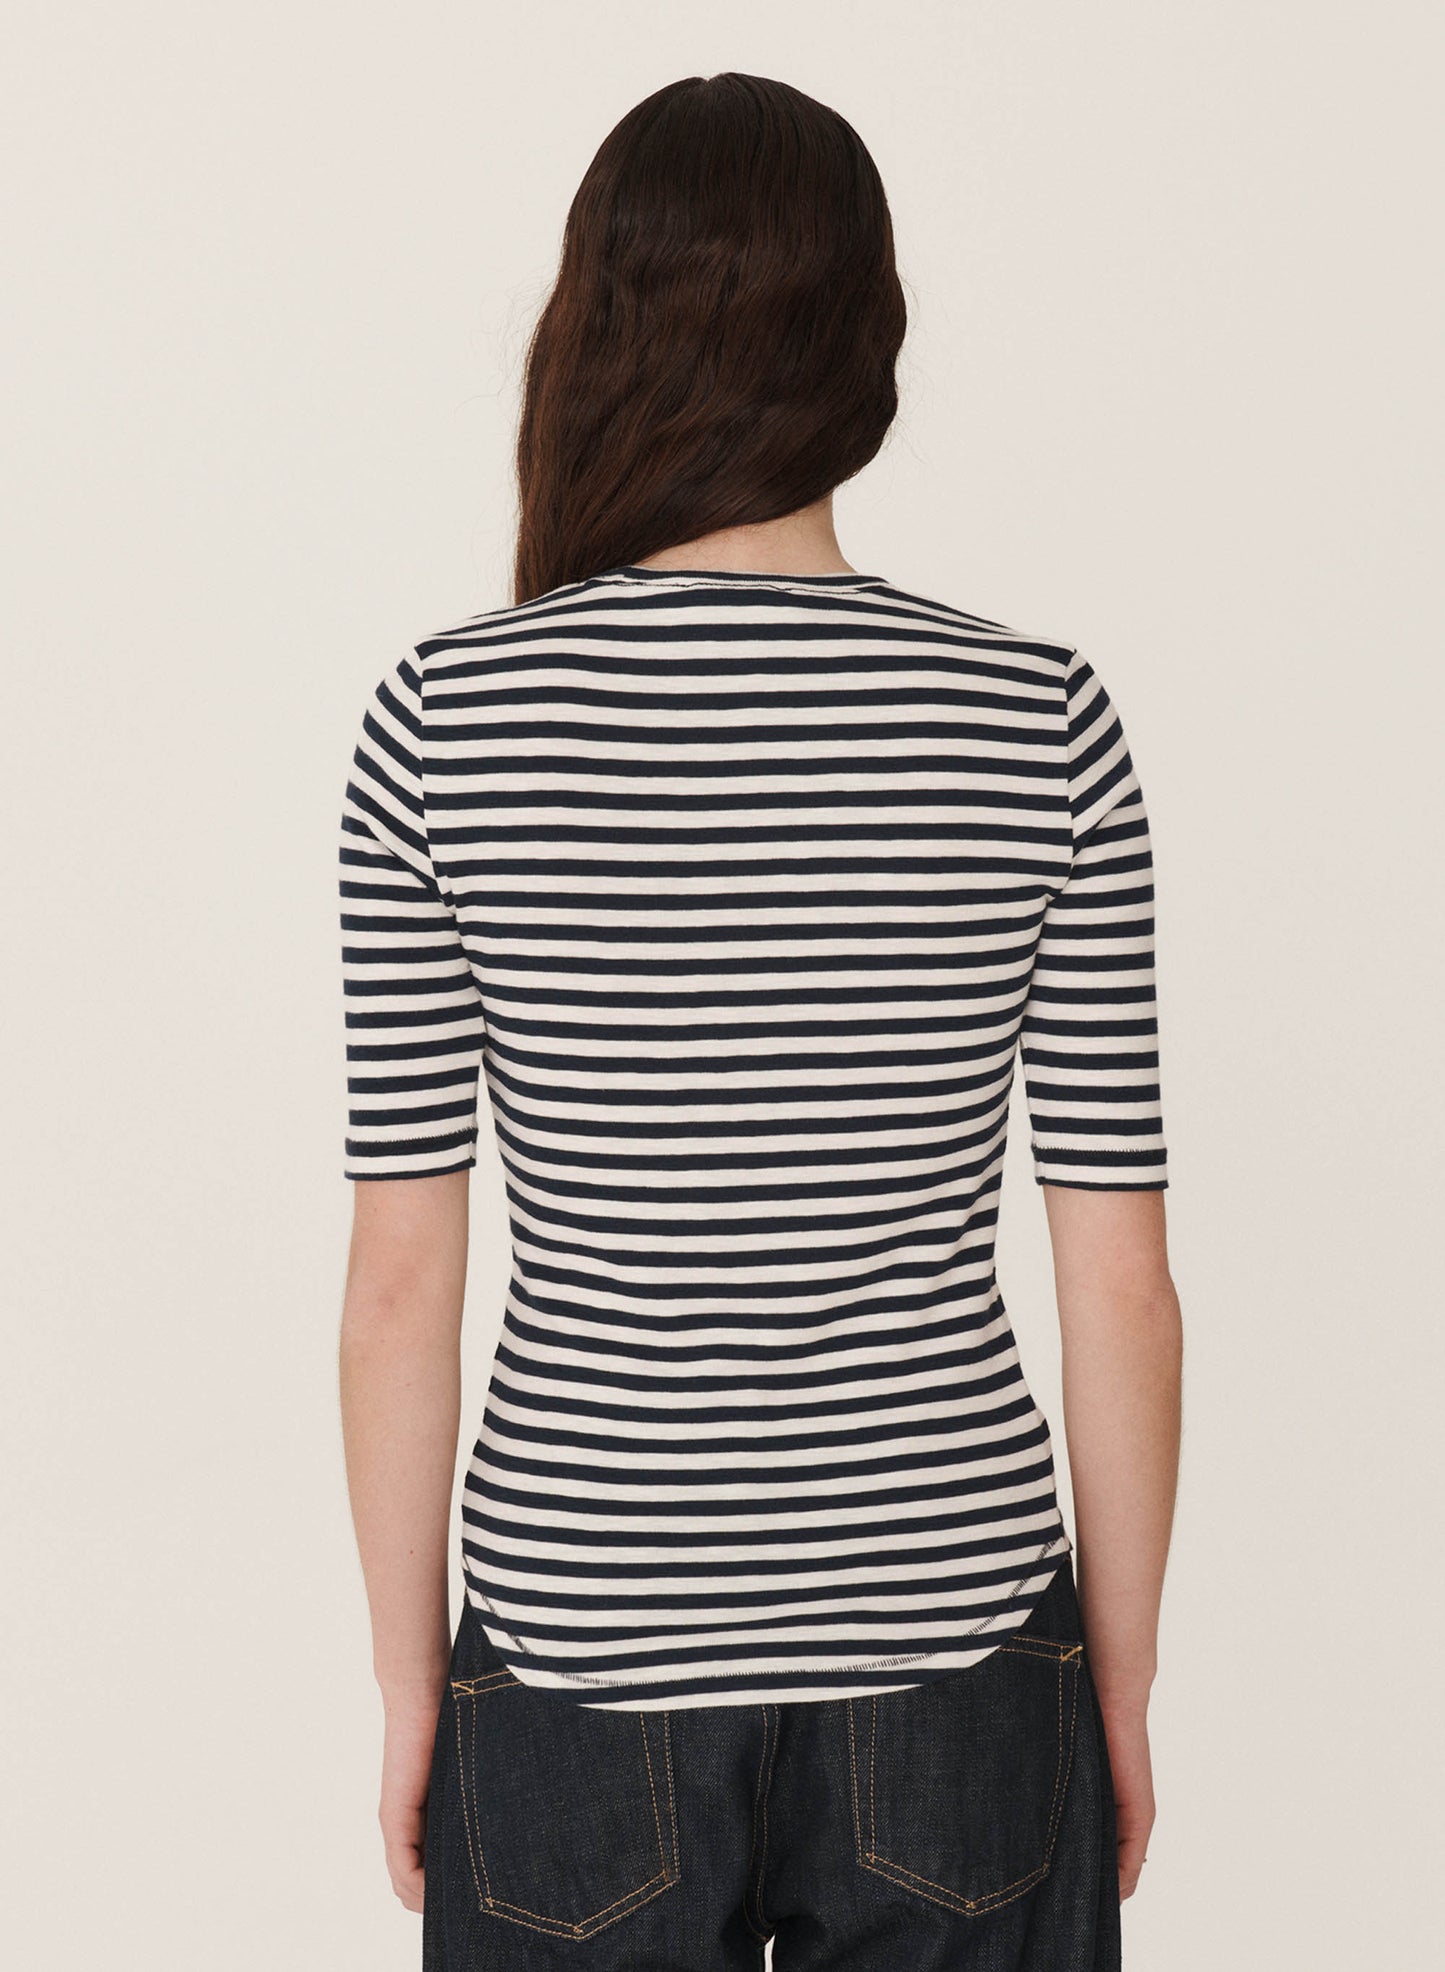 Charlotte Short Sleeve Top Navy and White